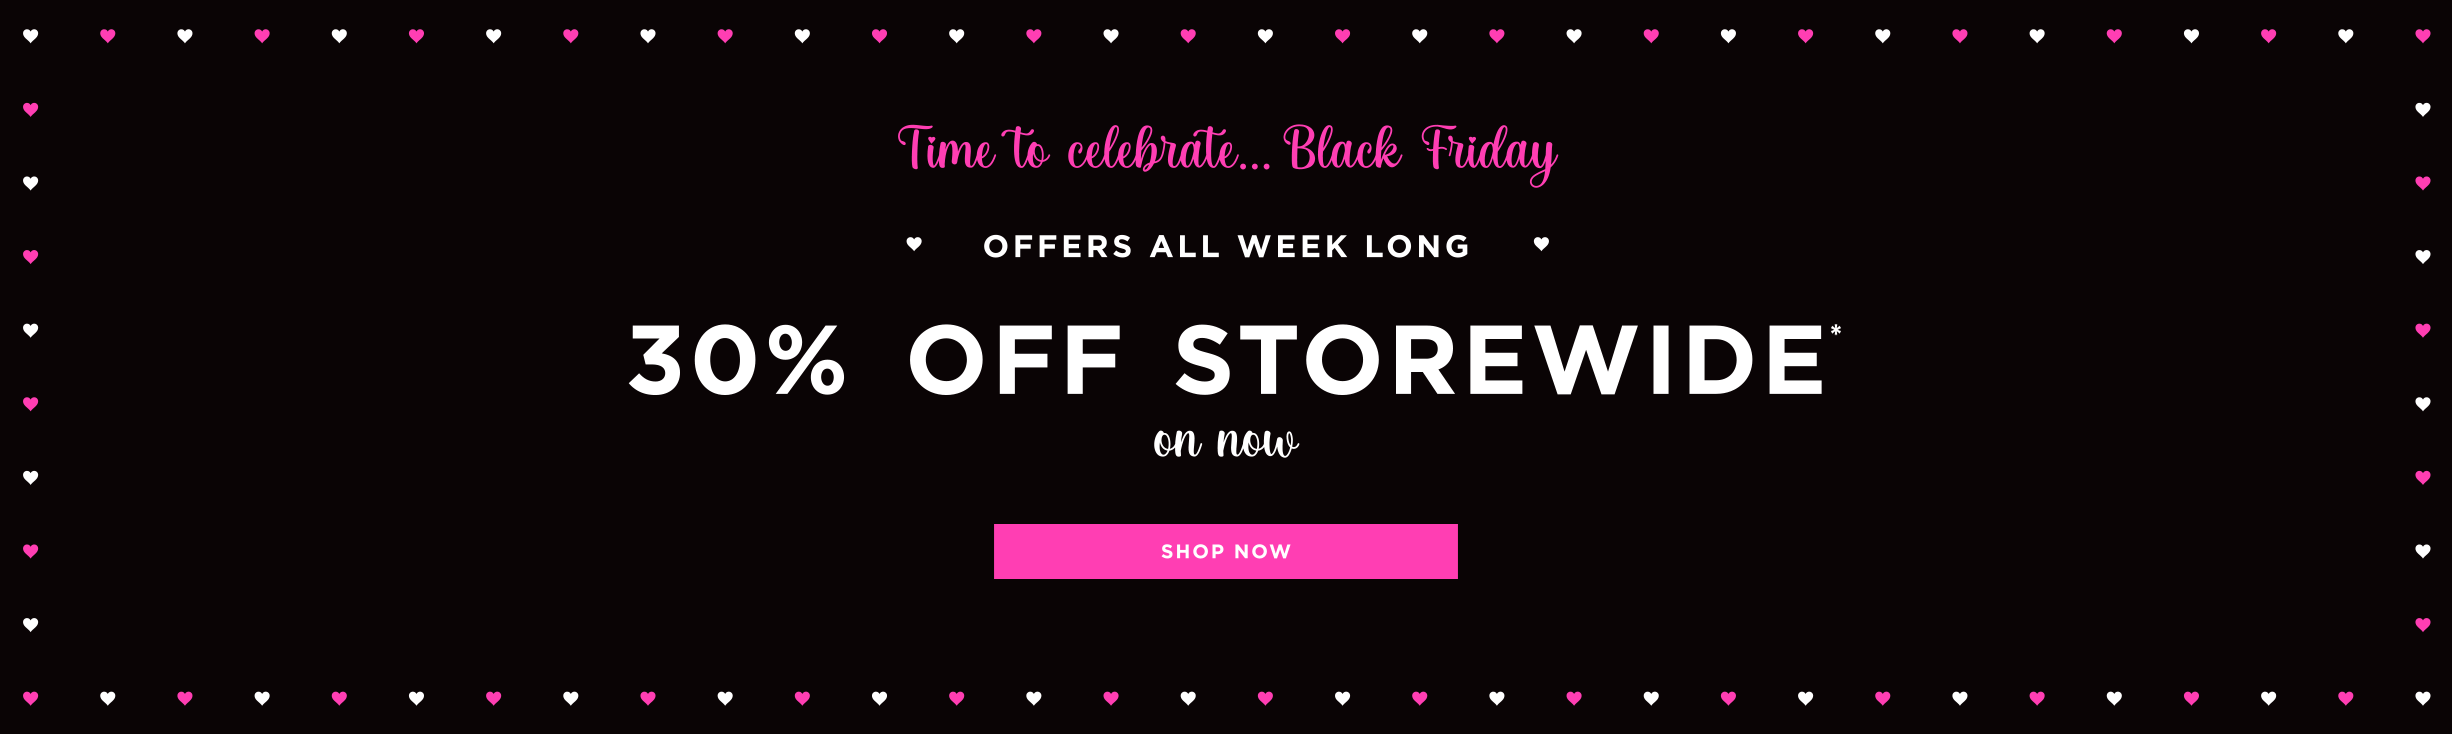 Review Black Friday 30% OFF storewide including dresses, tops, pants & more